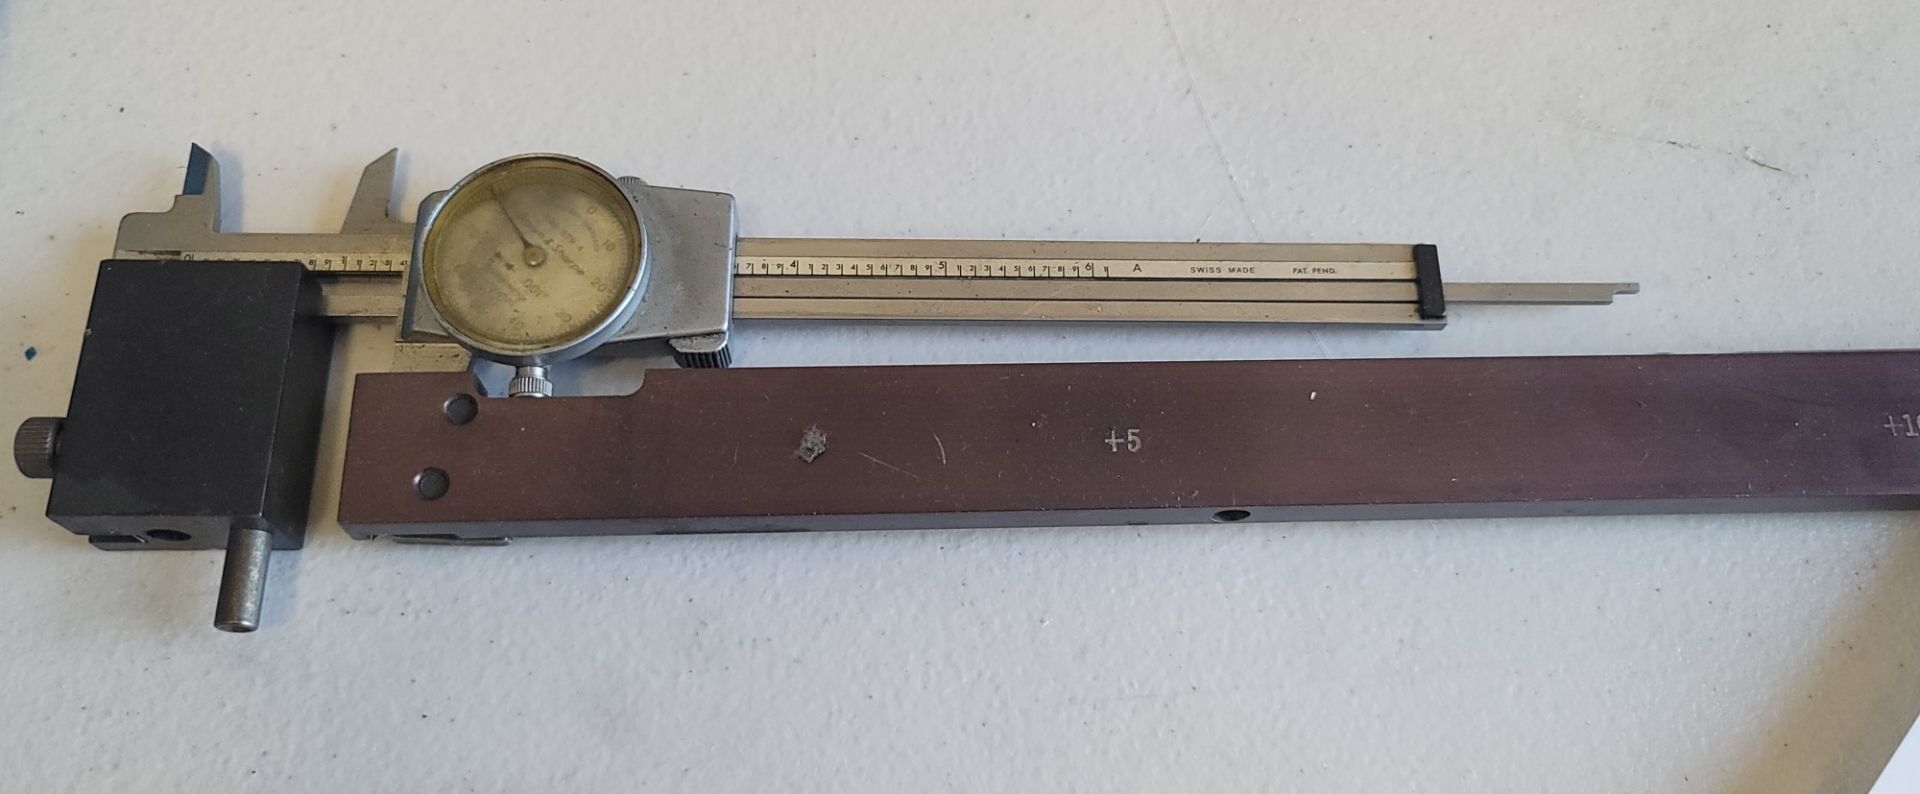 DIAL CALIPER W/ EXTENSION - Image 2 of 2